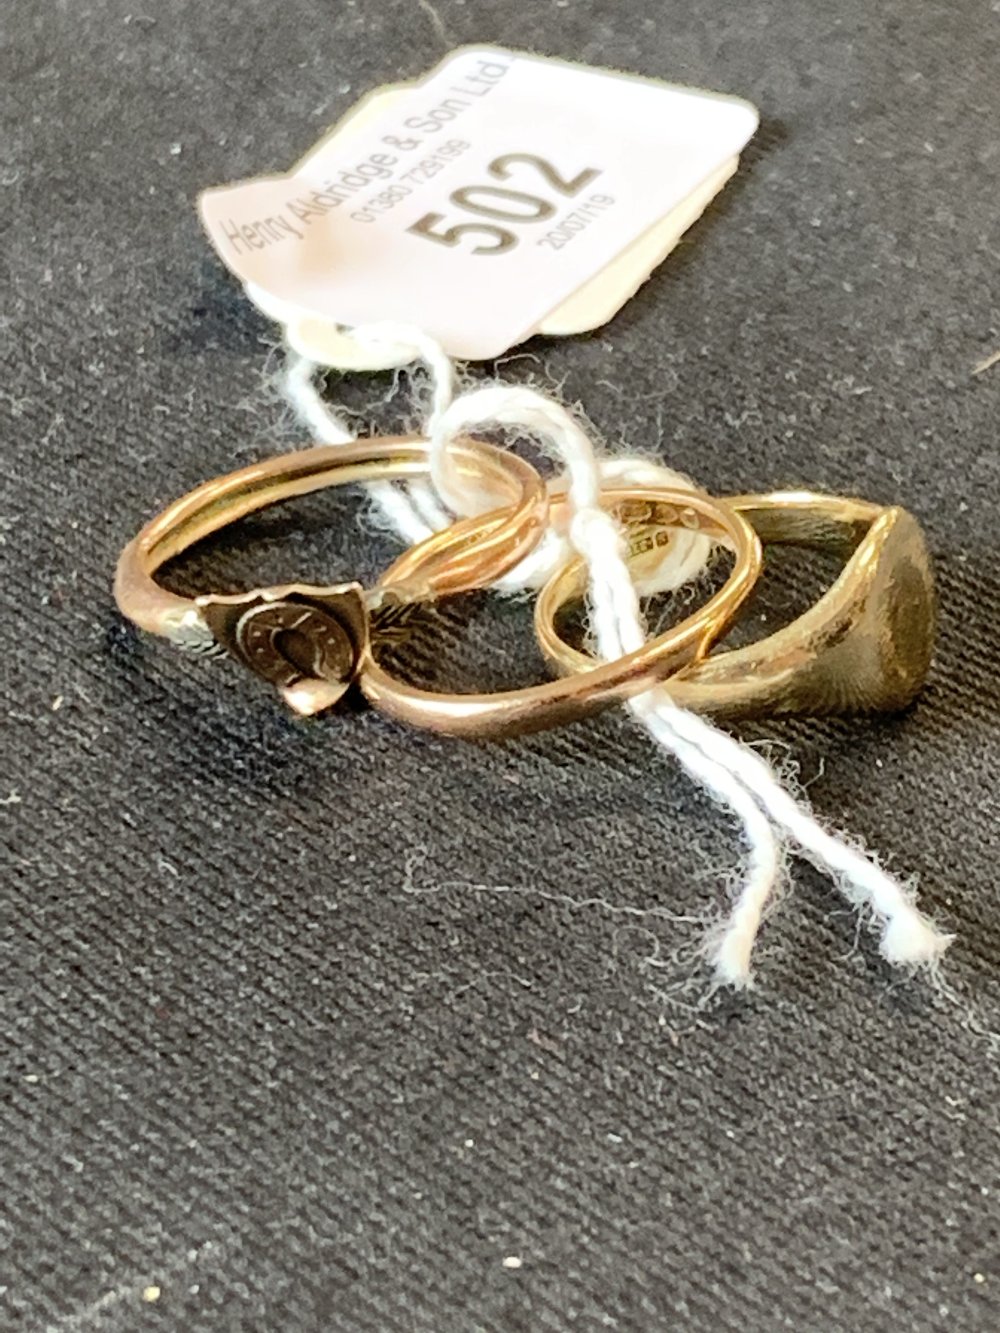 Jewellery: 9ct gold rings x 3. Approx. 6.6gms.